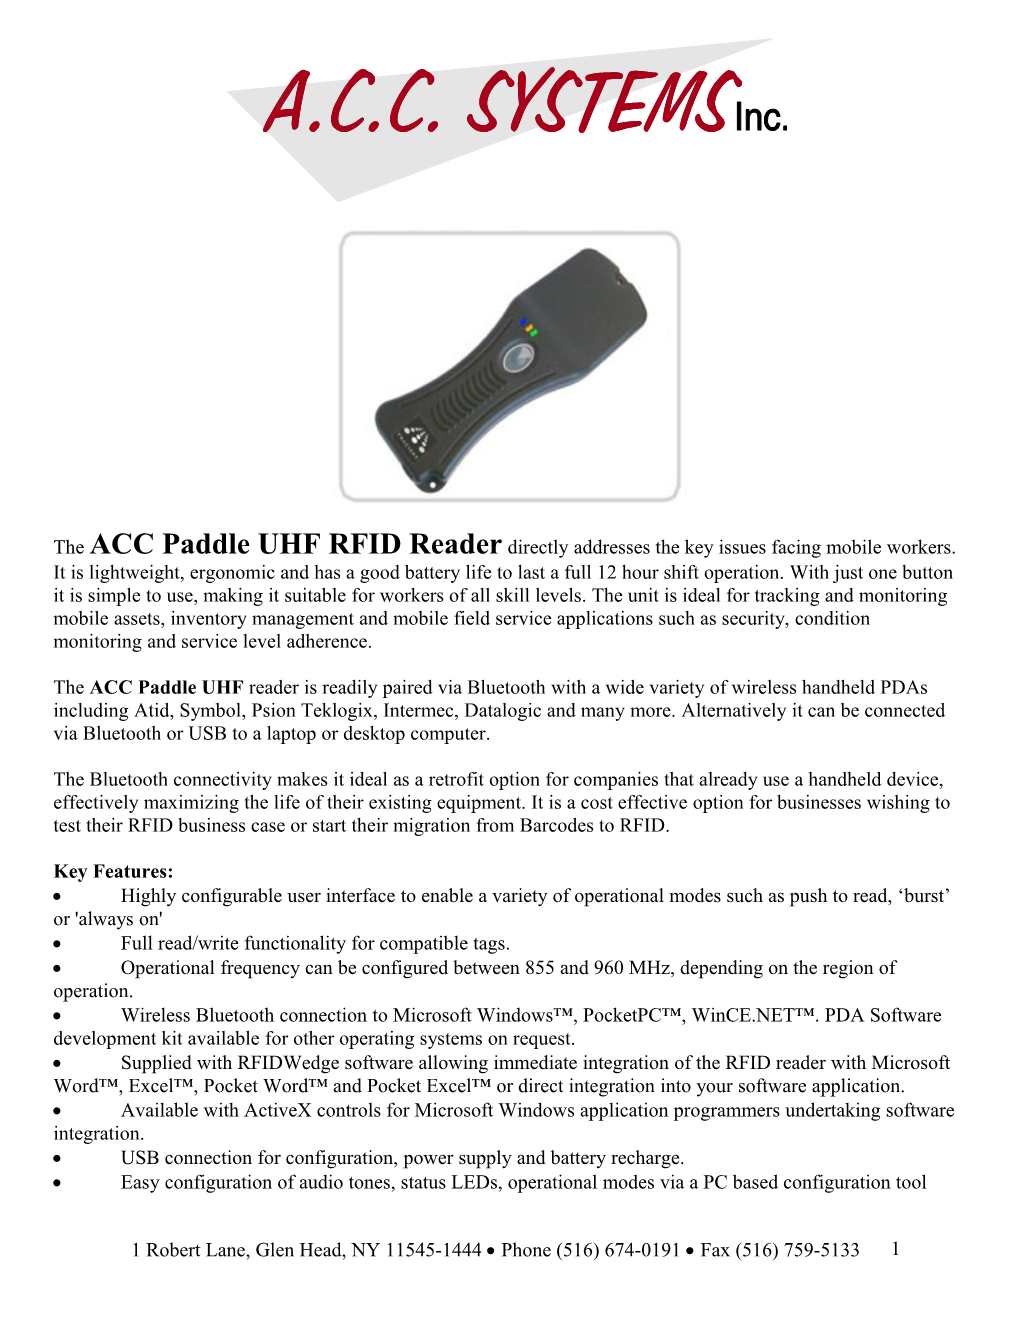 The ACC Paddle UHF RFID Reader Directly Addresses the Key Issues Facing Mobile Workers